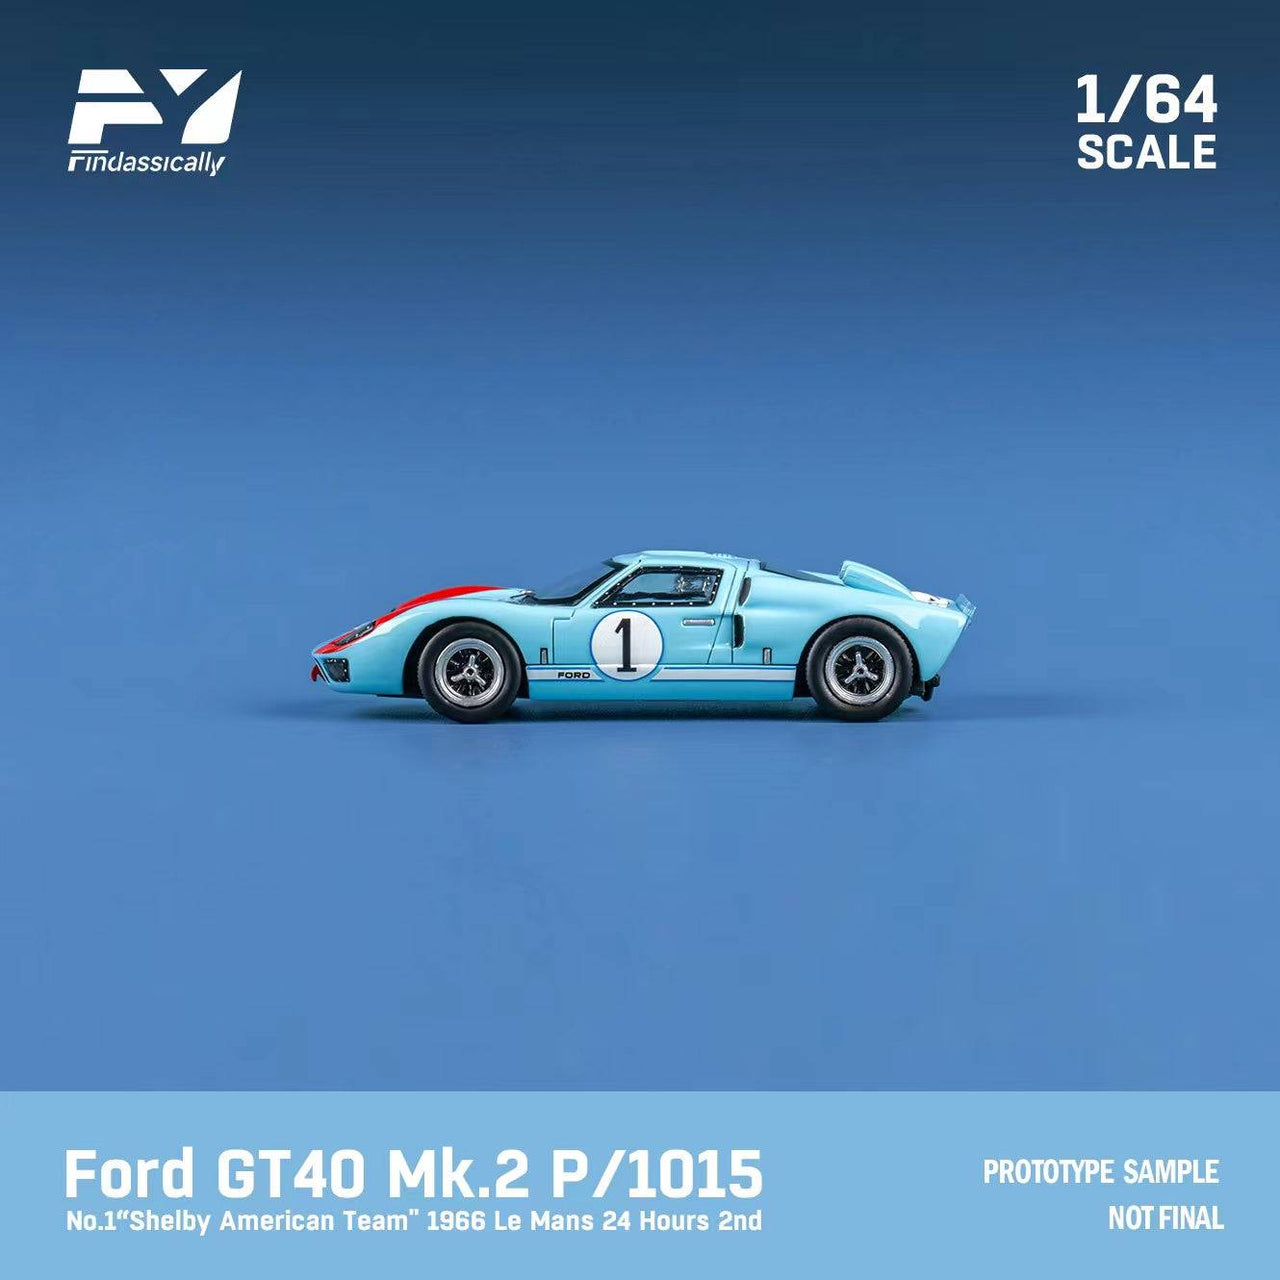 PRE-ORDER Finclassically 1:64 Ford GT40 MK II LeMans